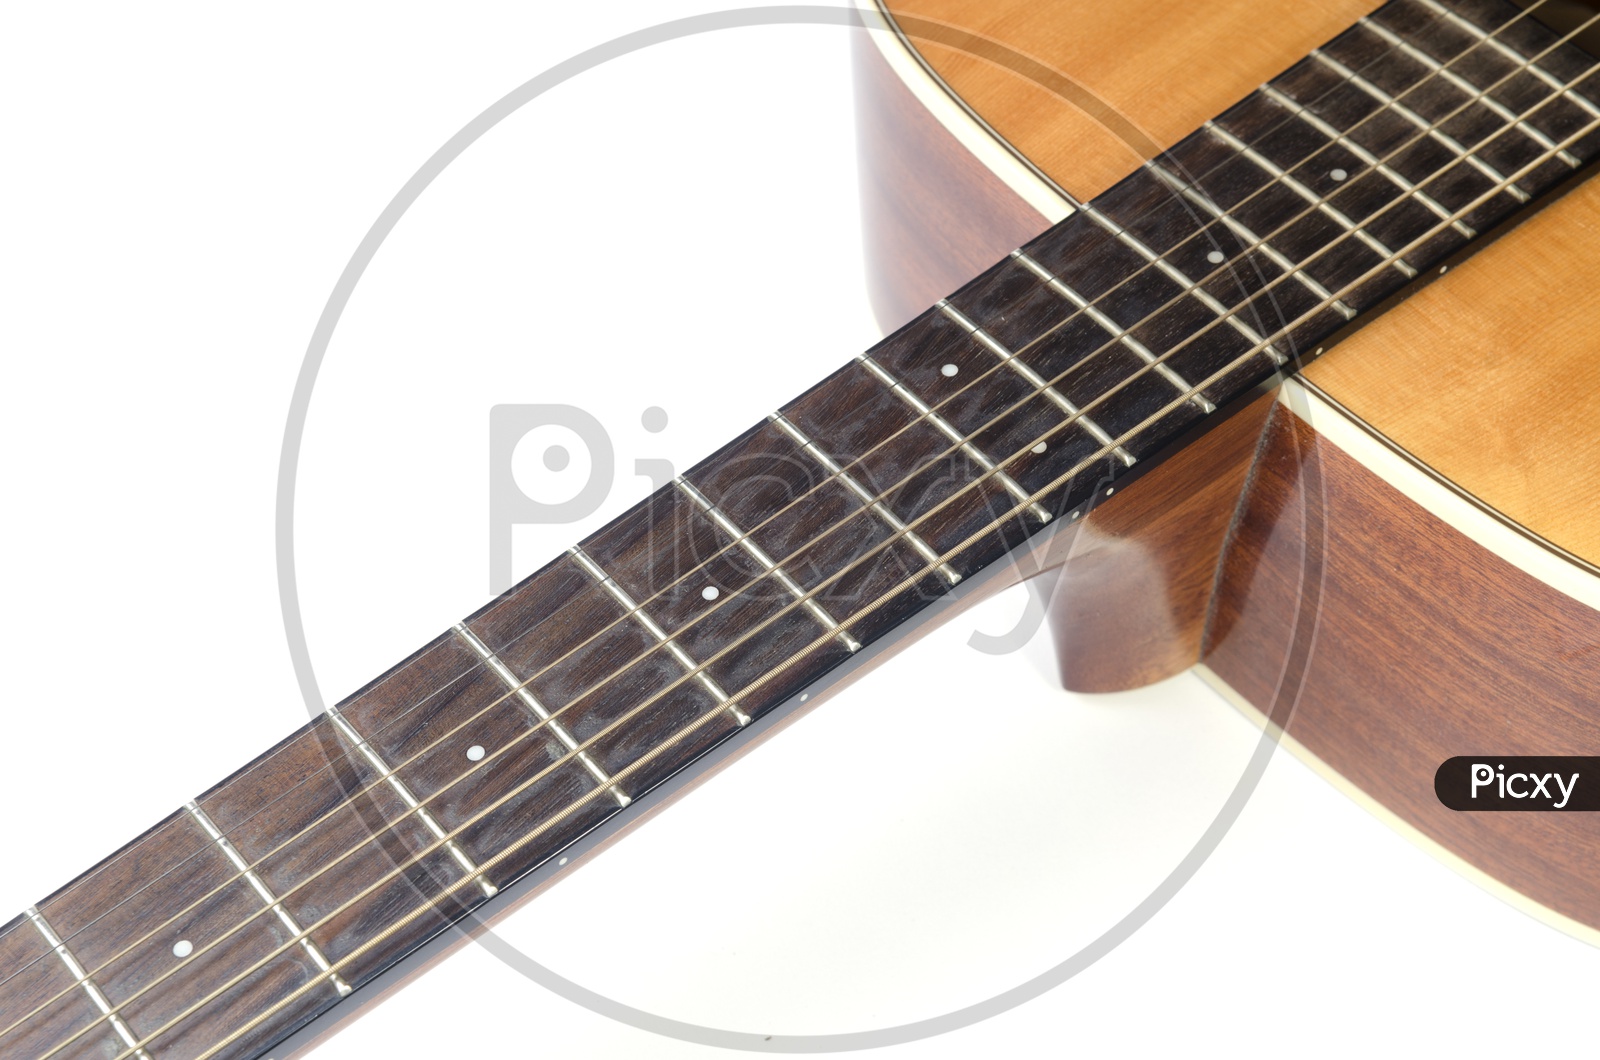 Guitar Strings Closeup On an Isolated White Background